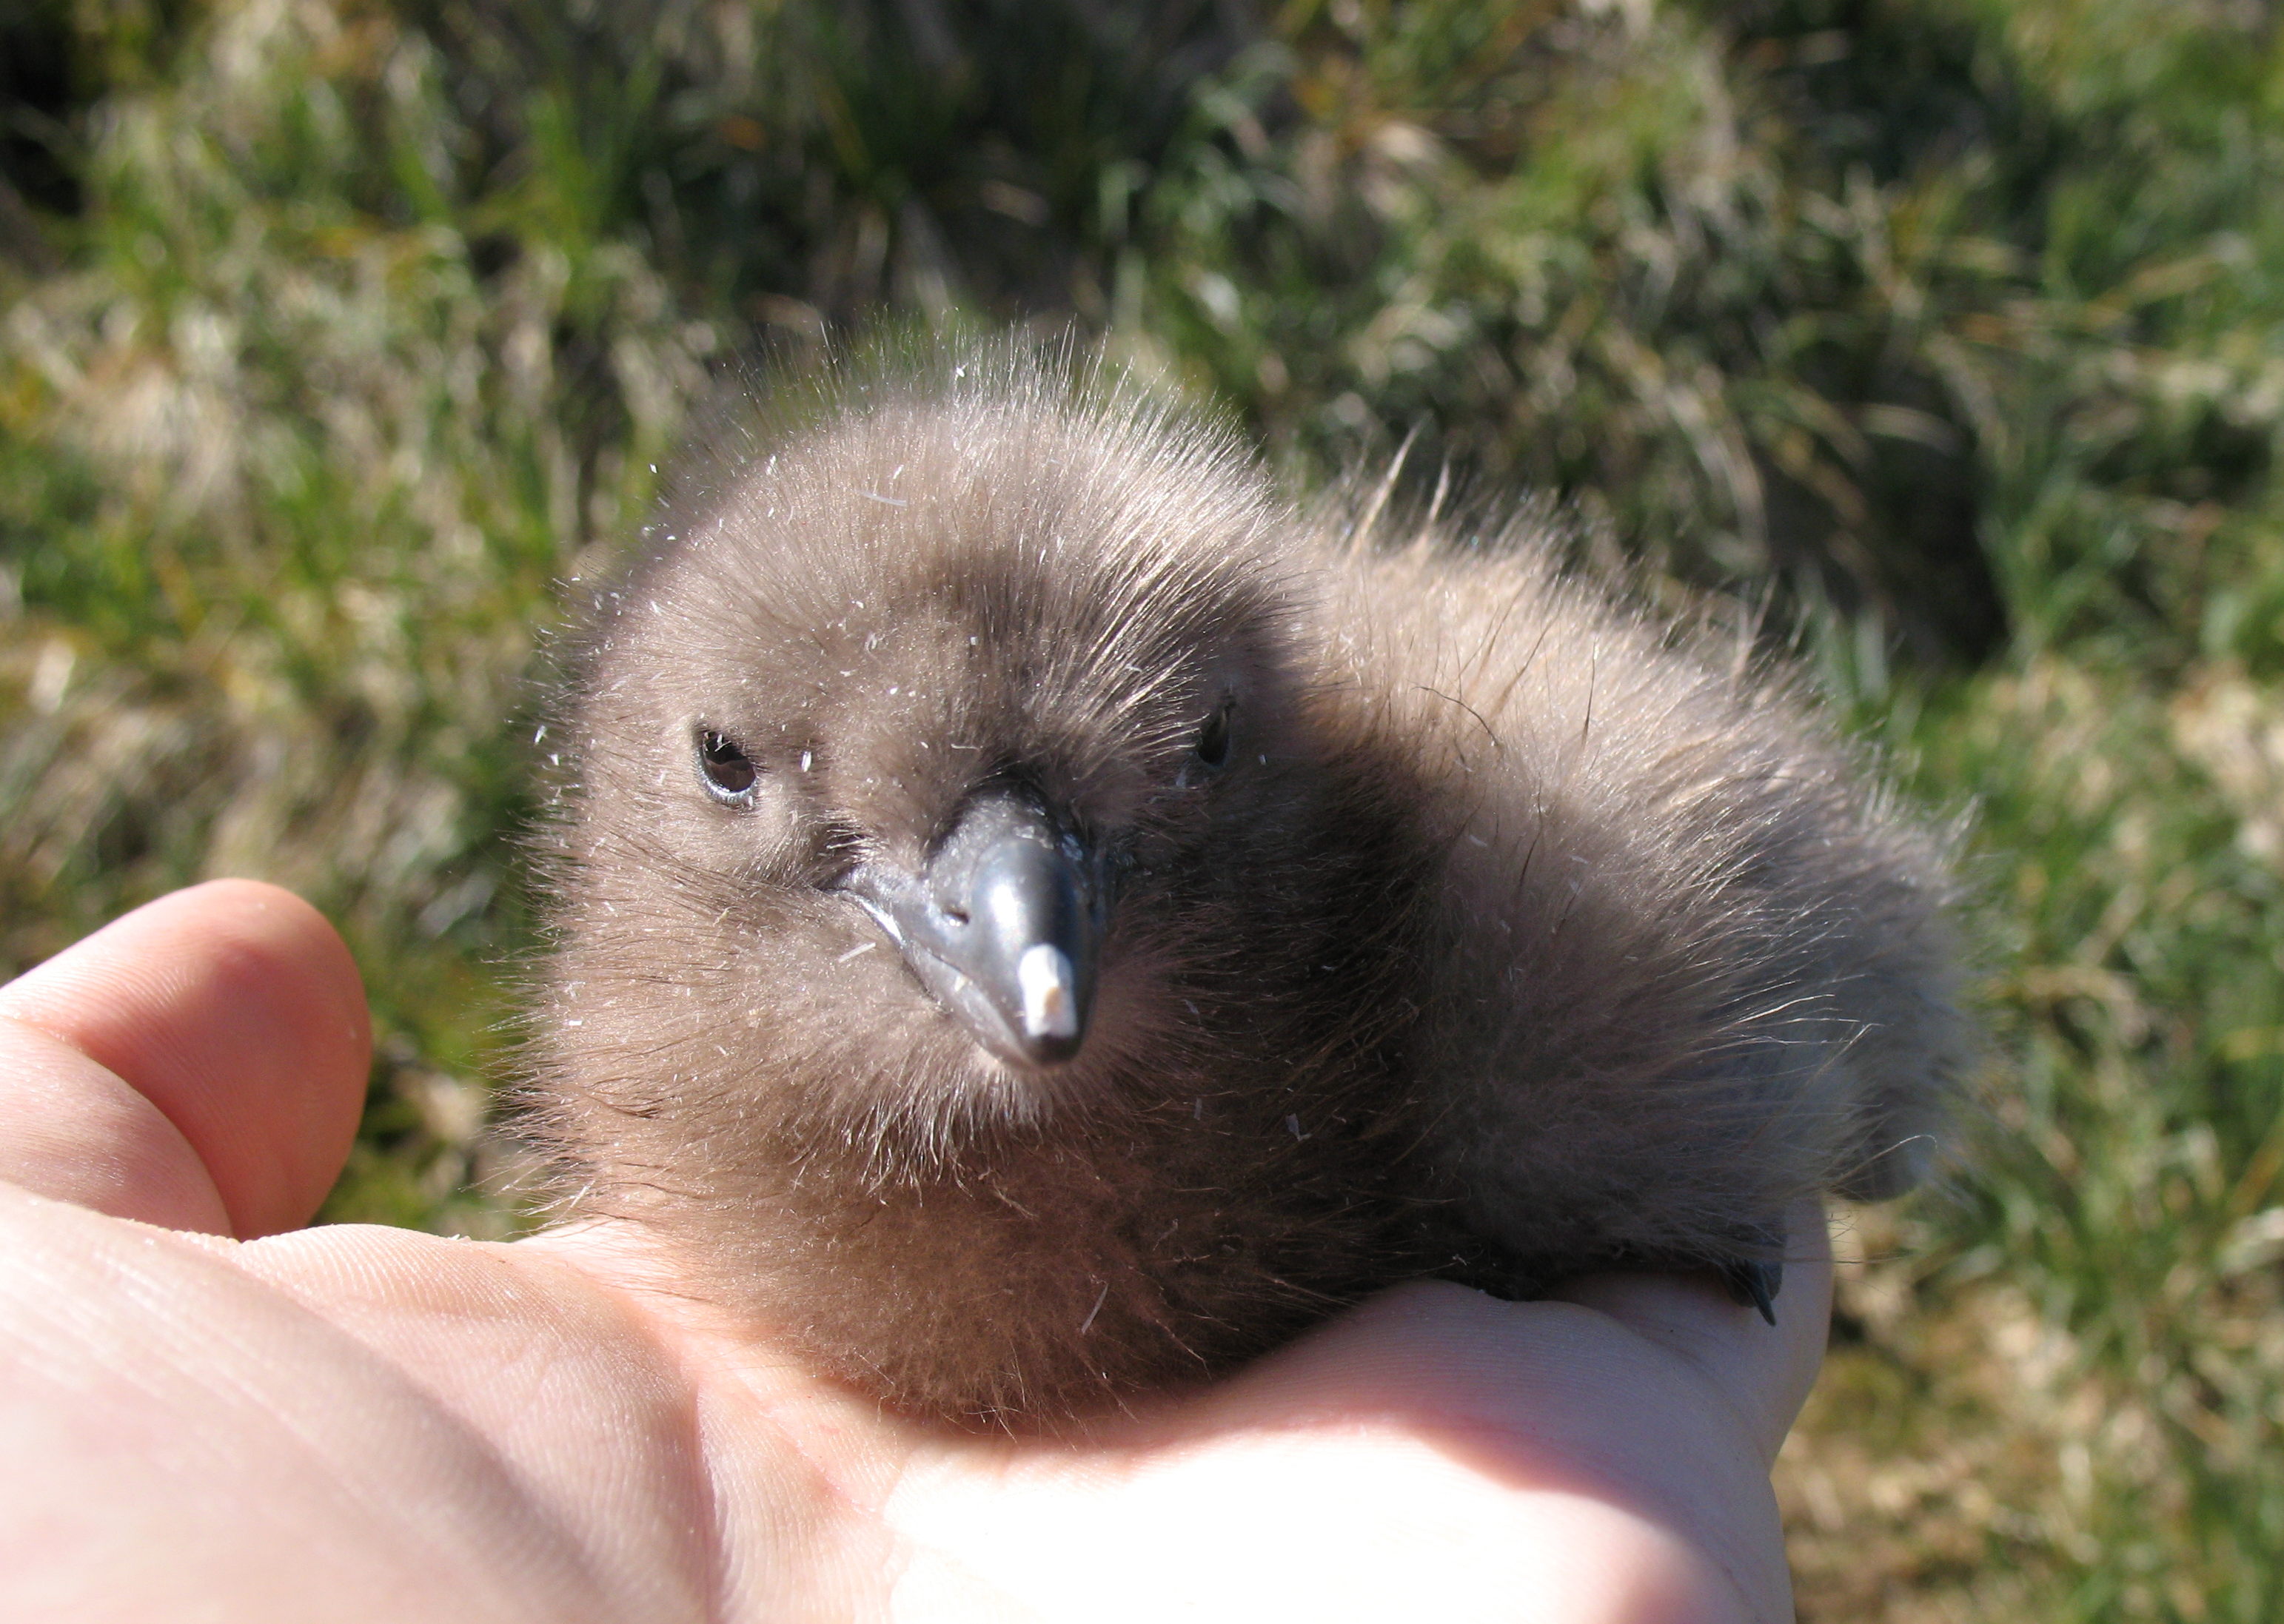  A Skua chick (species unknown) with visible egg tooth. Photo taken on January 8, 2008.